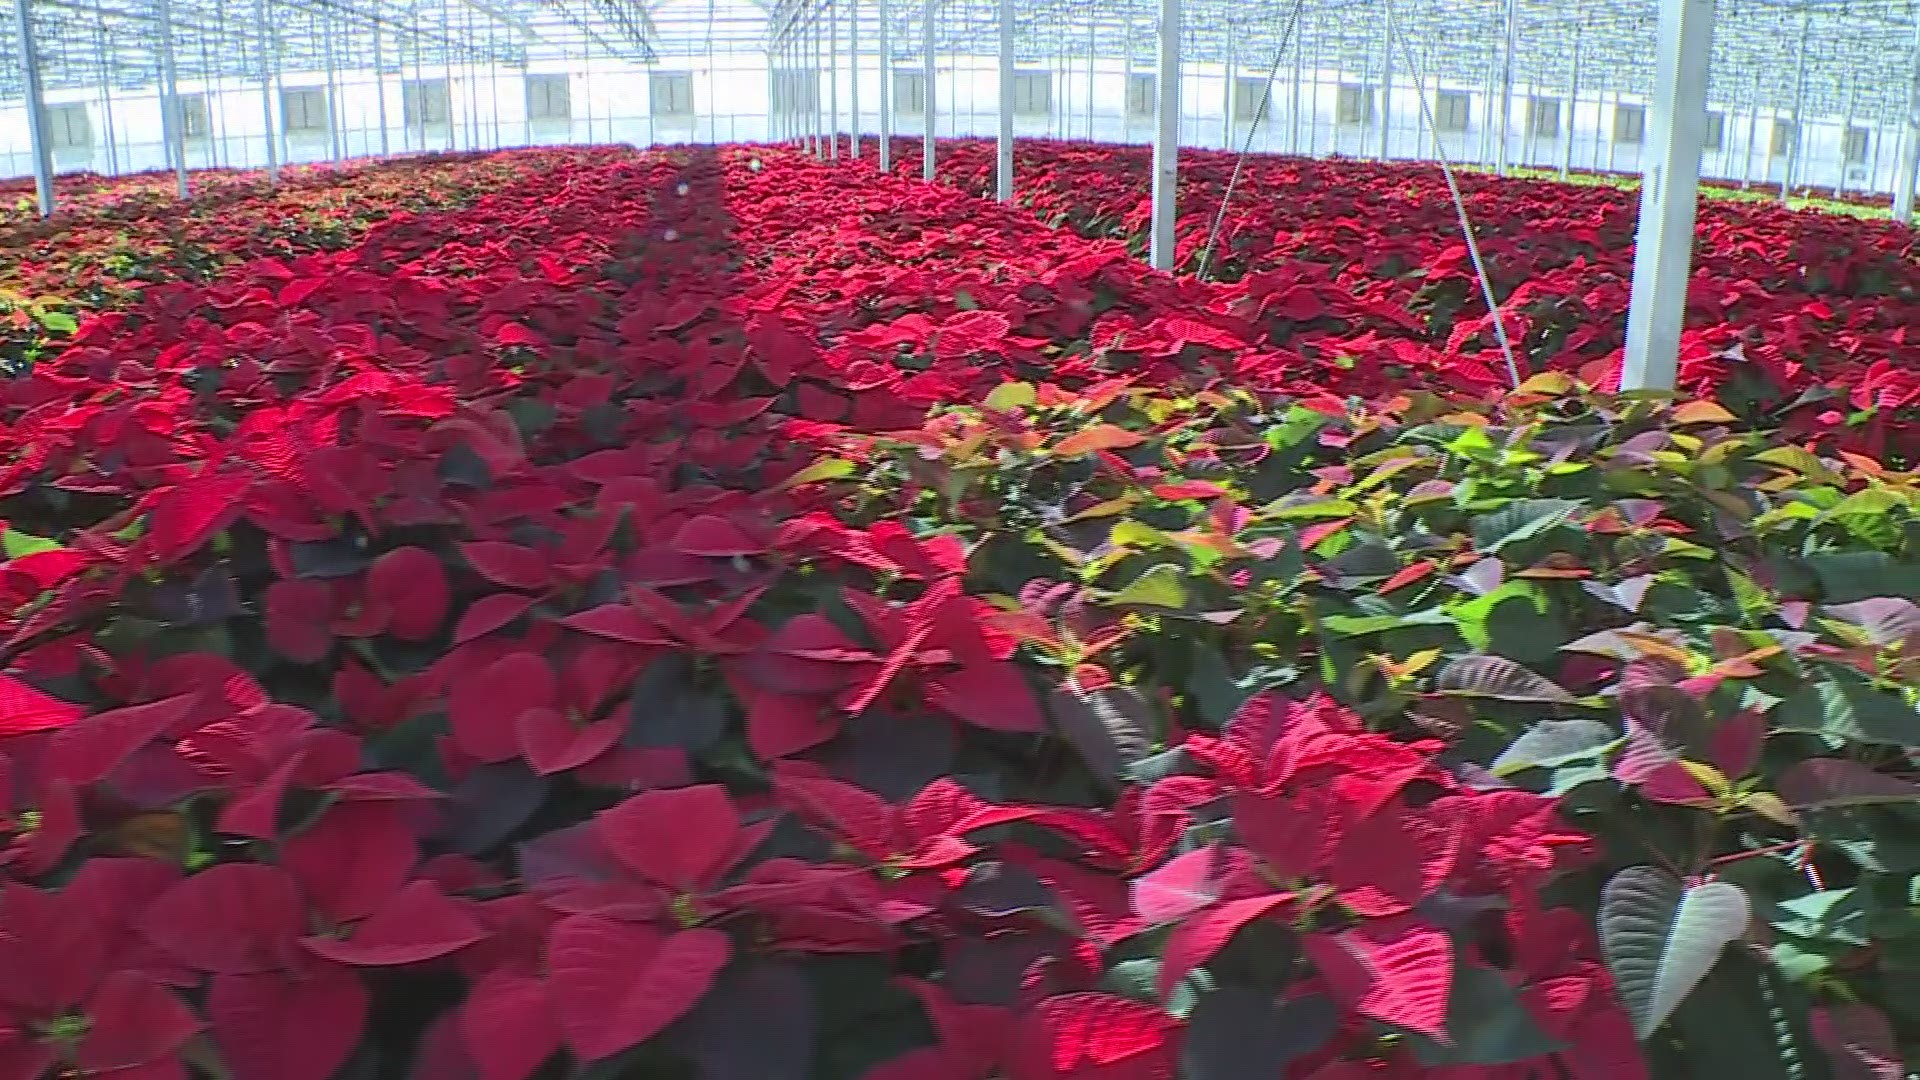 Poinsettias are grown for the holiday season, but you can keep yours alive and thriving all year so it blooms again next Christmas.